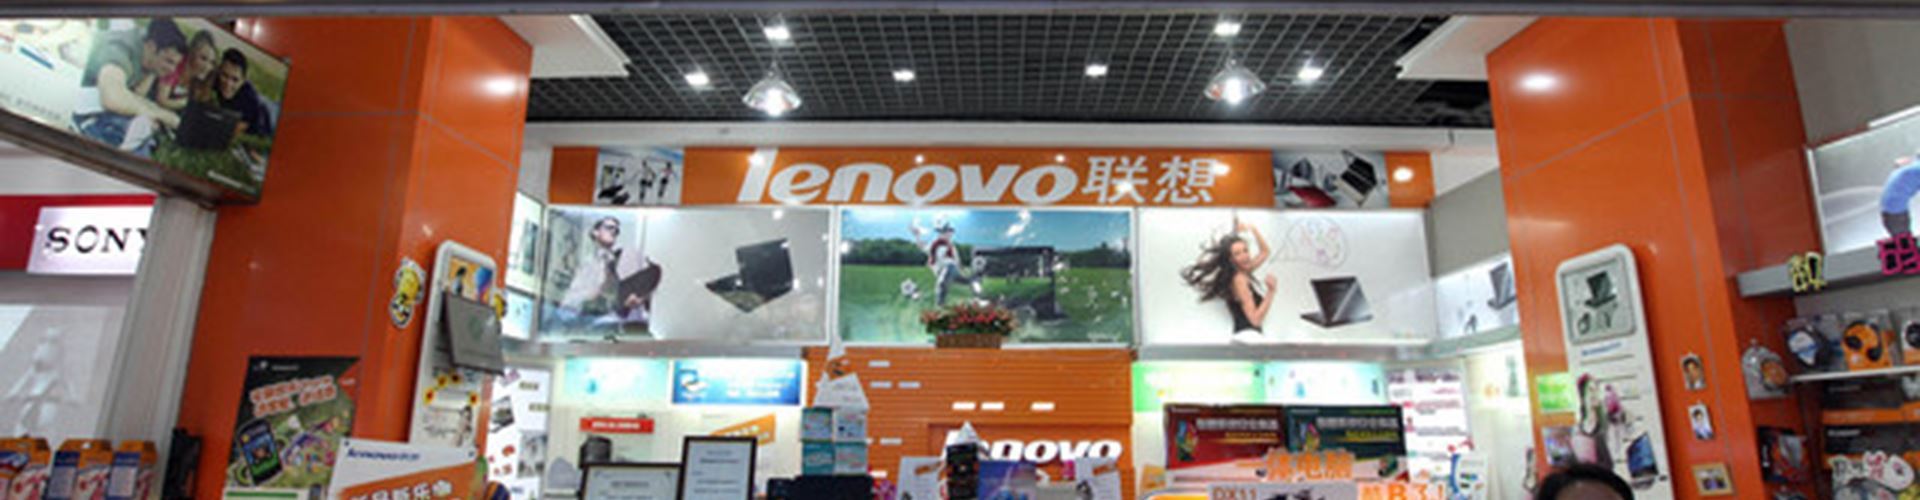 Lenovo gains show China’s tech muscle